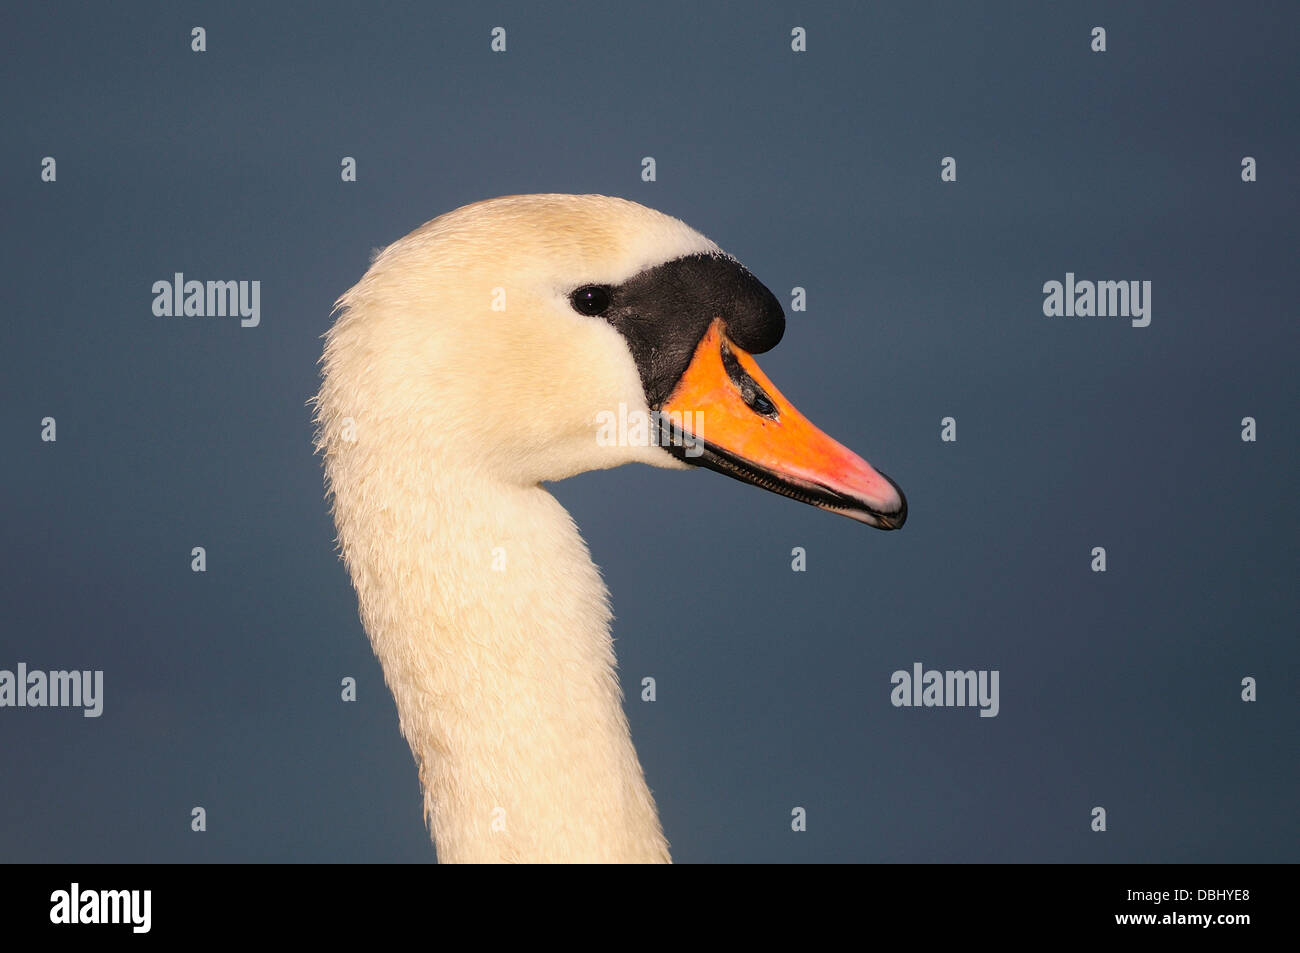 The head and neck of a mute swan Stock Photo